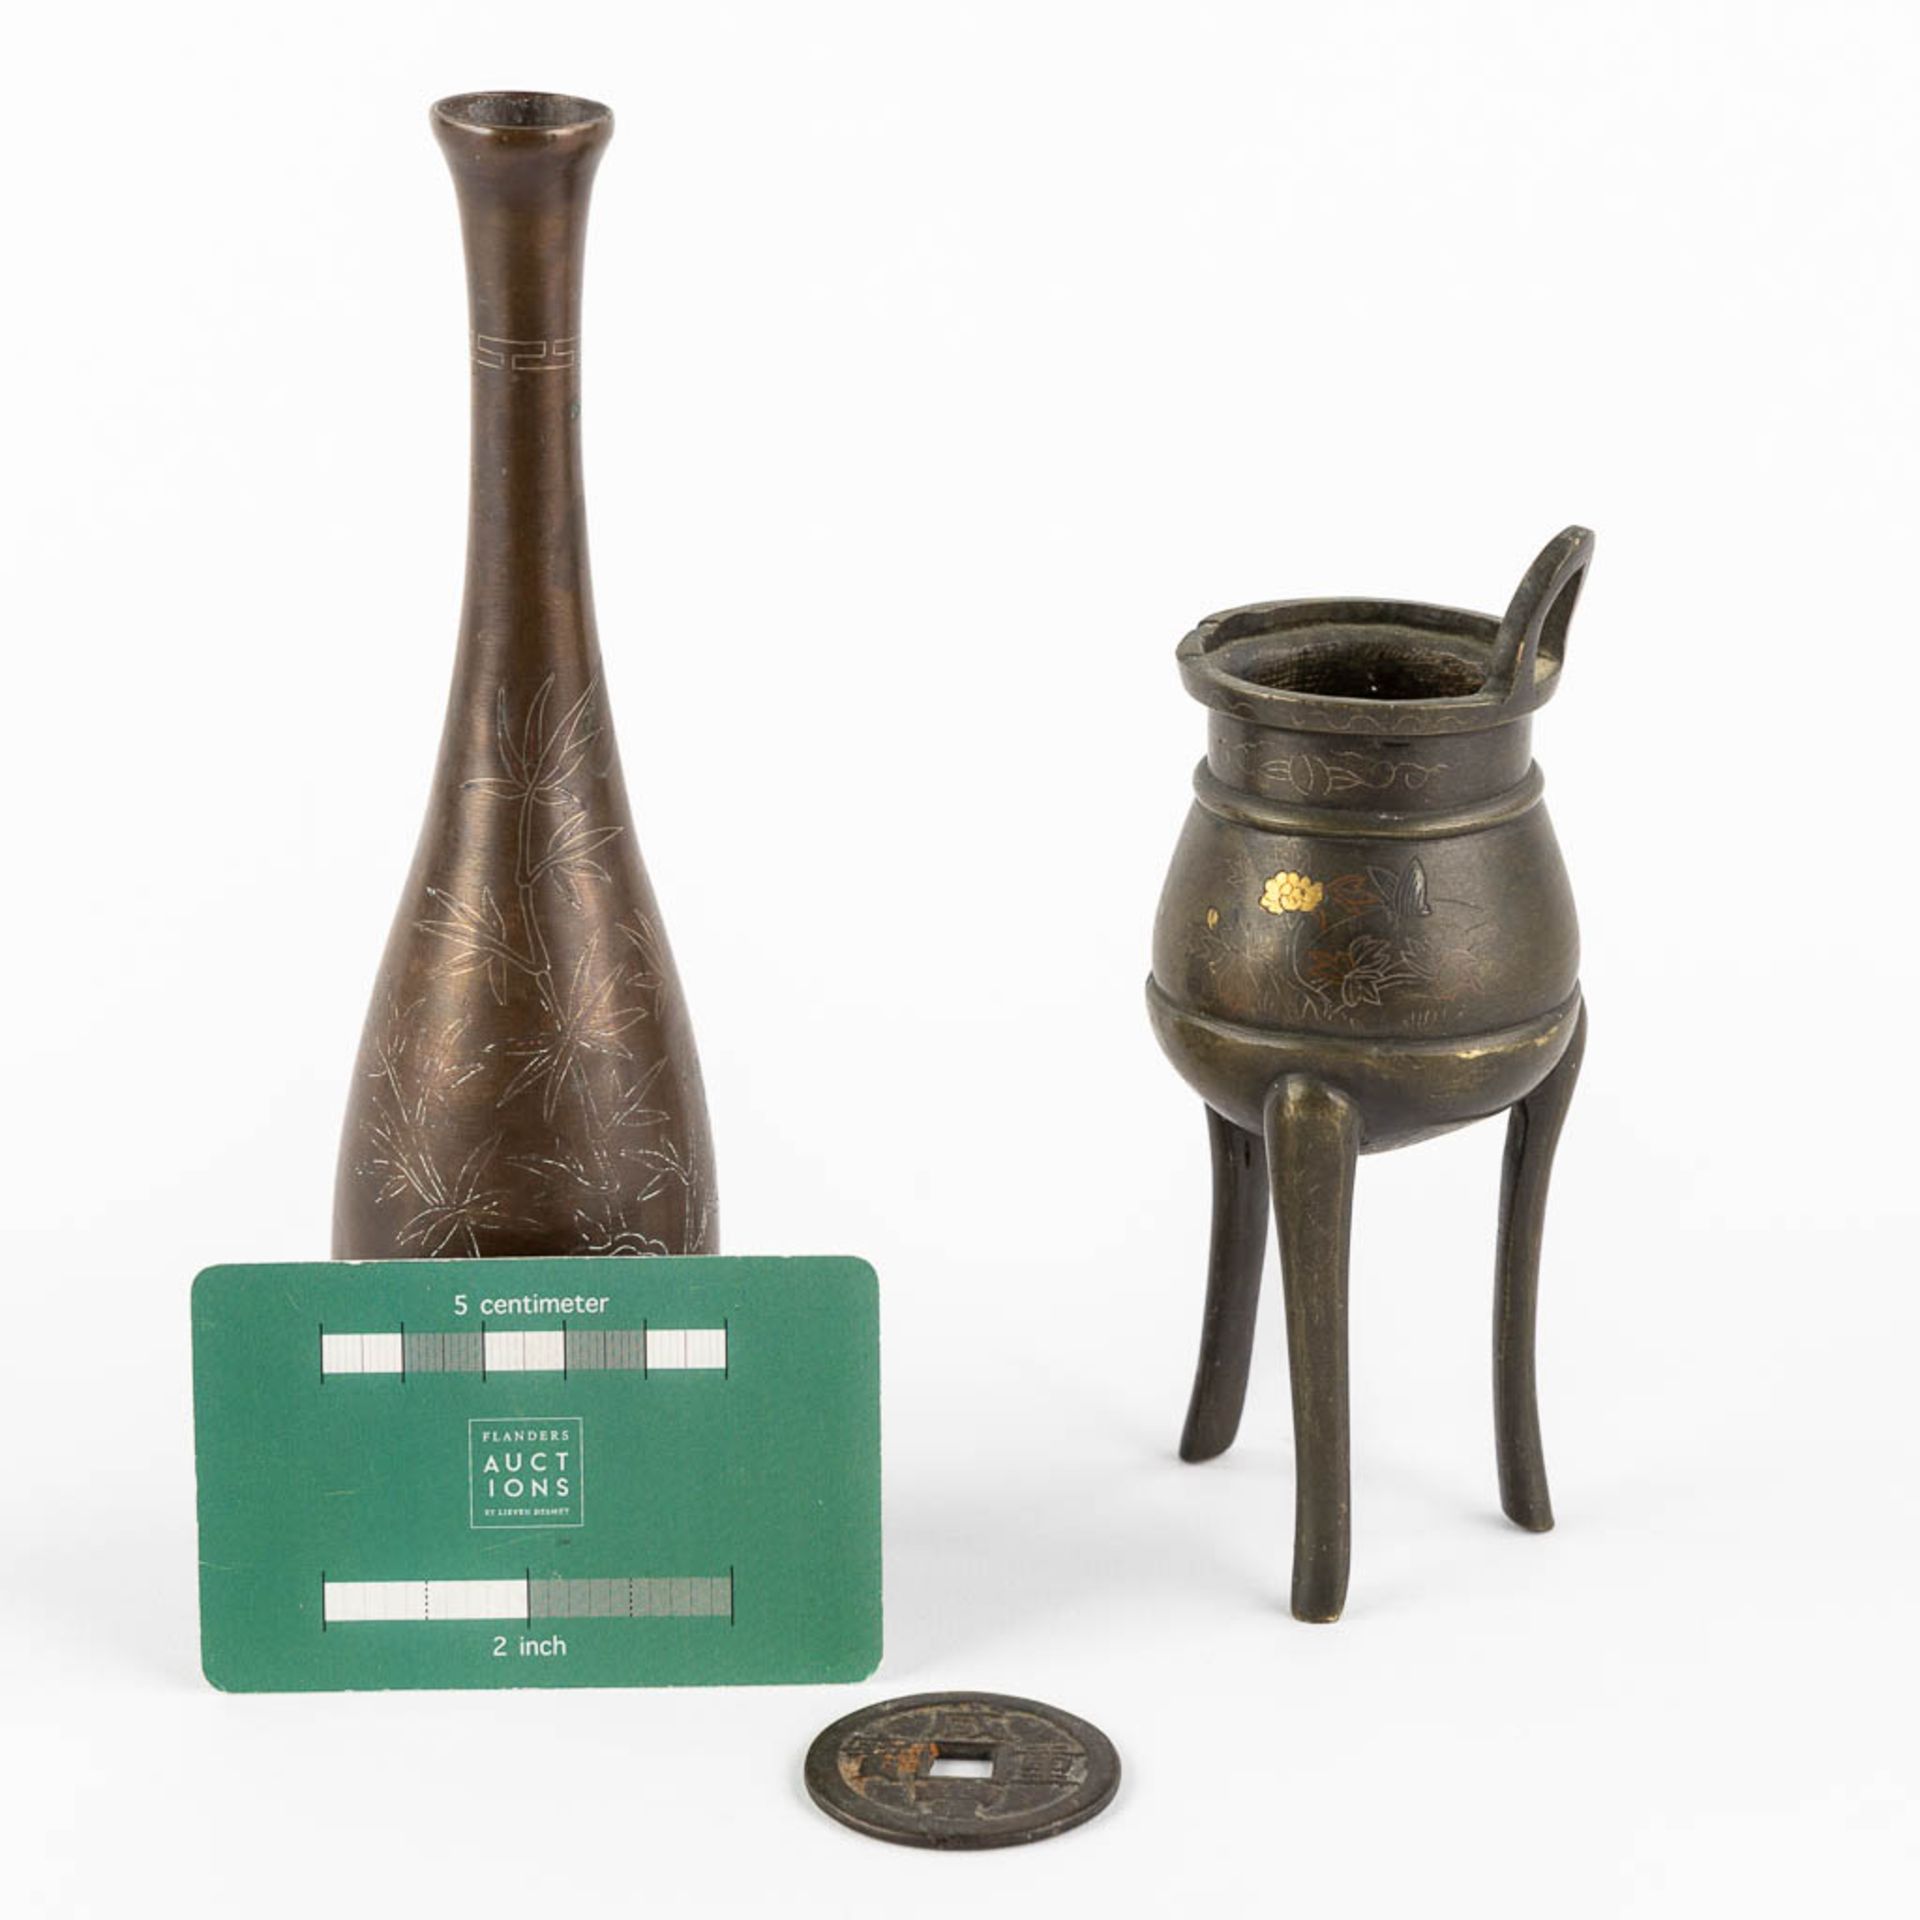 A Chinese insence burner, vase and a lucky coin. Bronze. (H:19 x D:5 cm) - Image 2 of 19